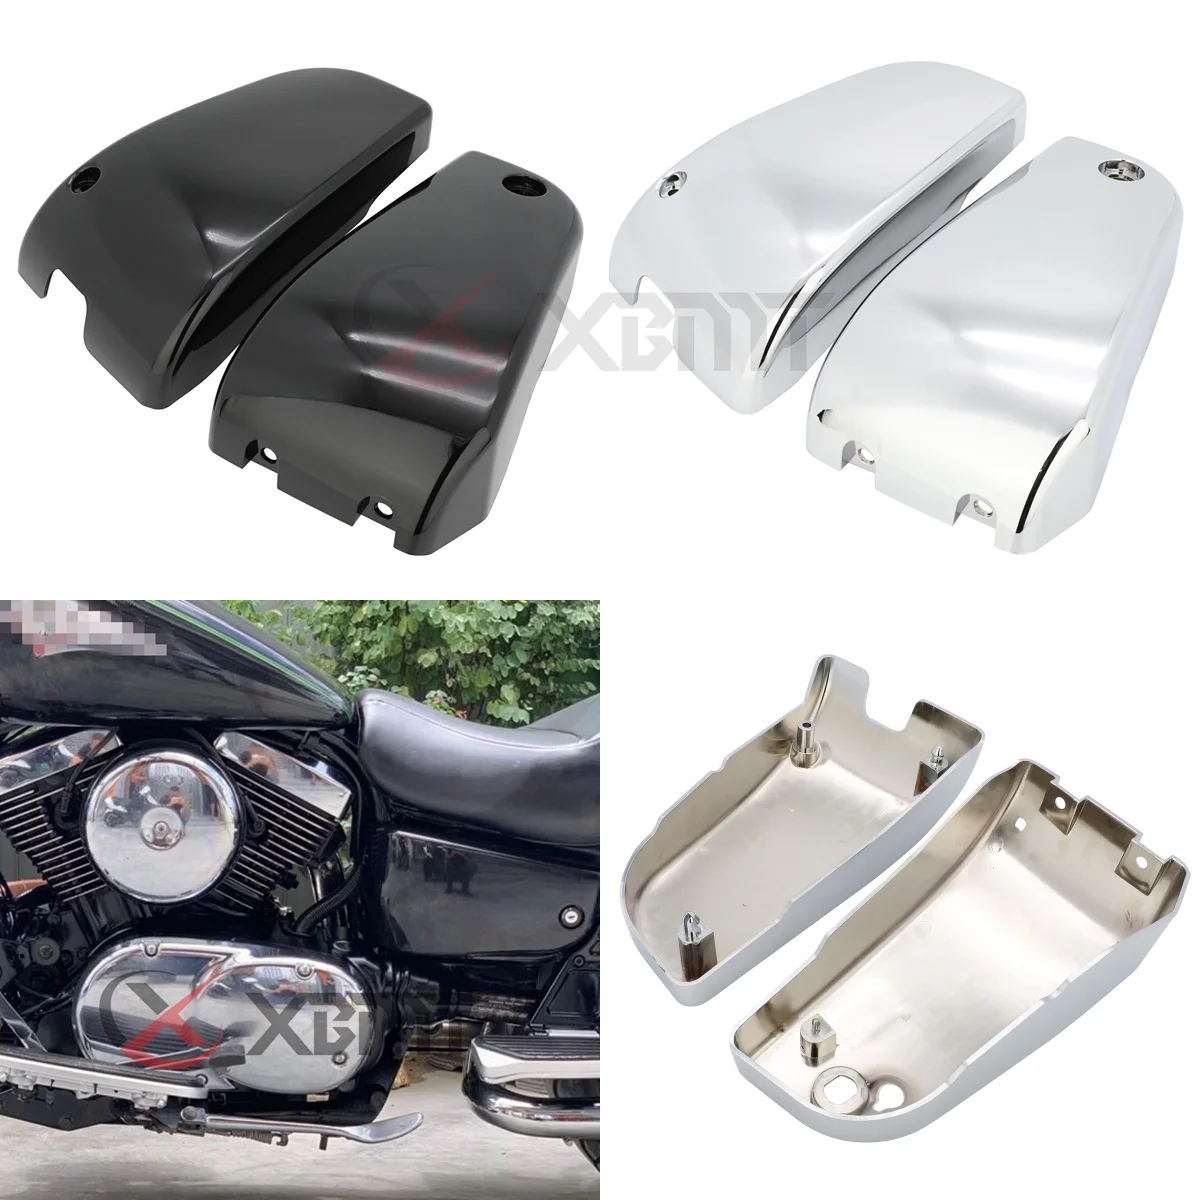 Motorcycle ABS Plastic Battery Side Fairings Cover For Kawasaki Vulcan 1500 VN1500 Classic Nomad 1996-2017 2014 2015 2016